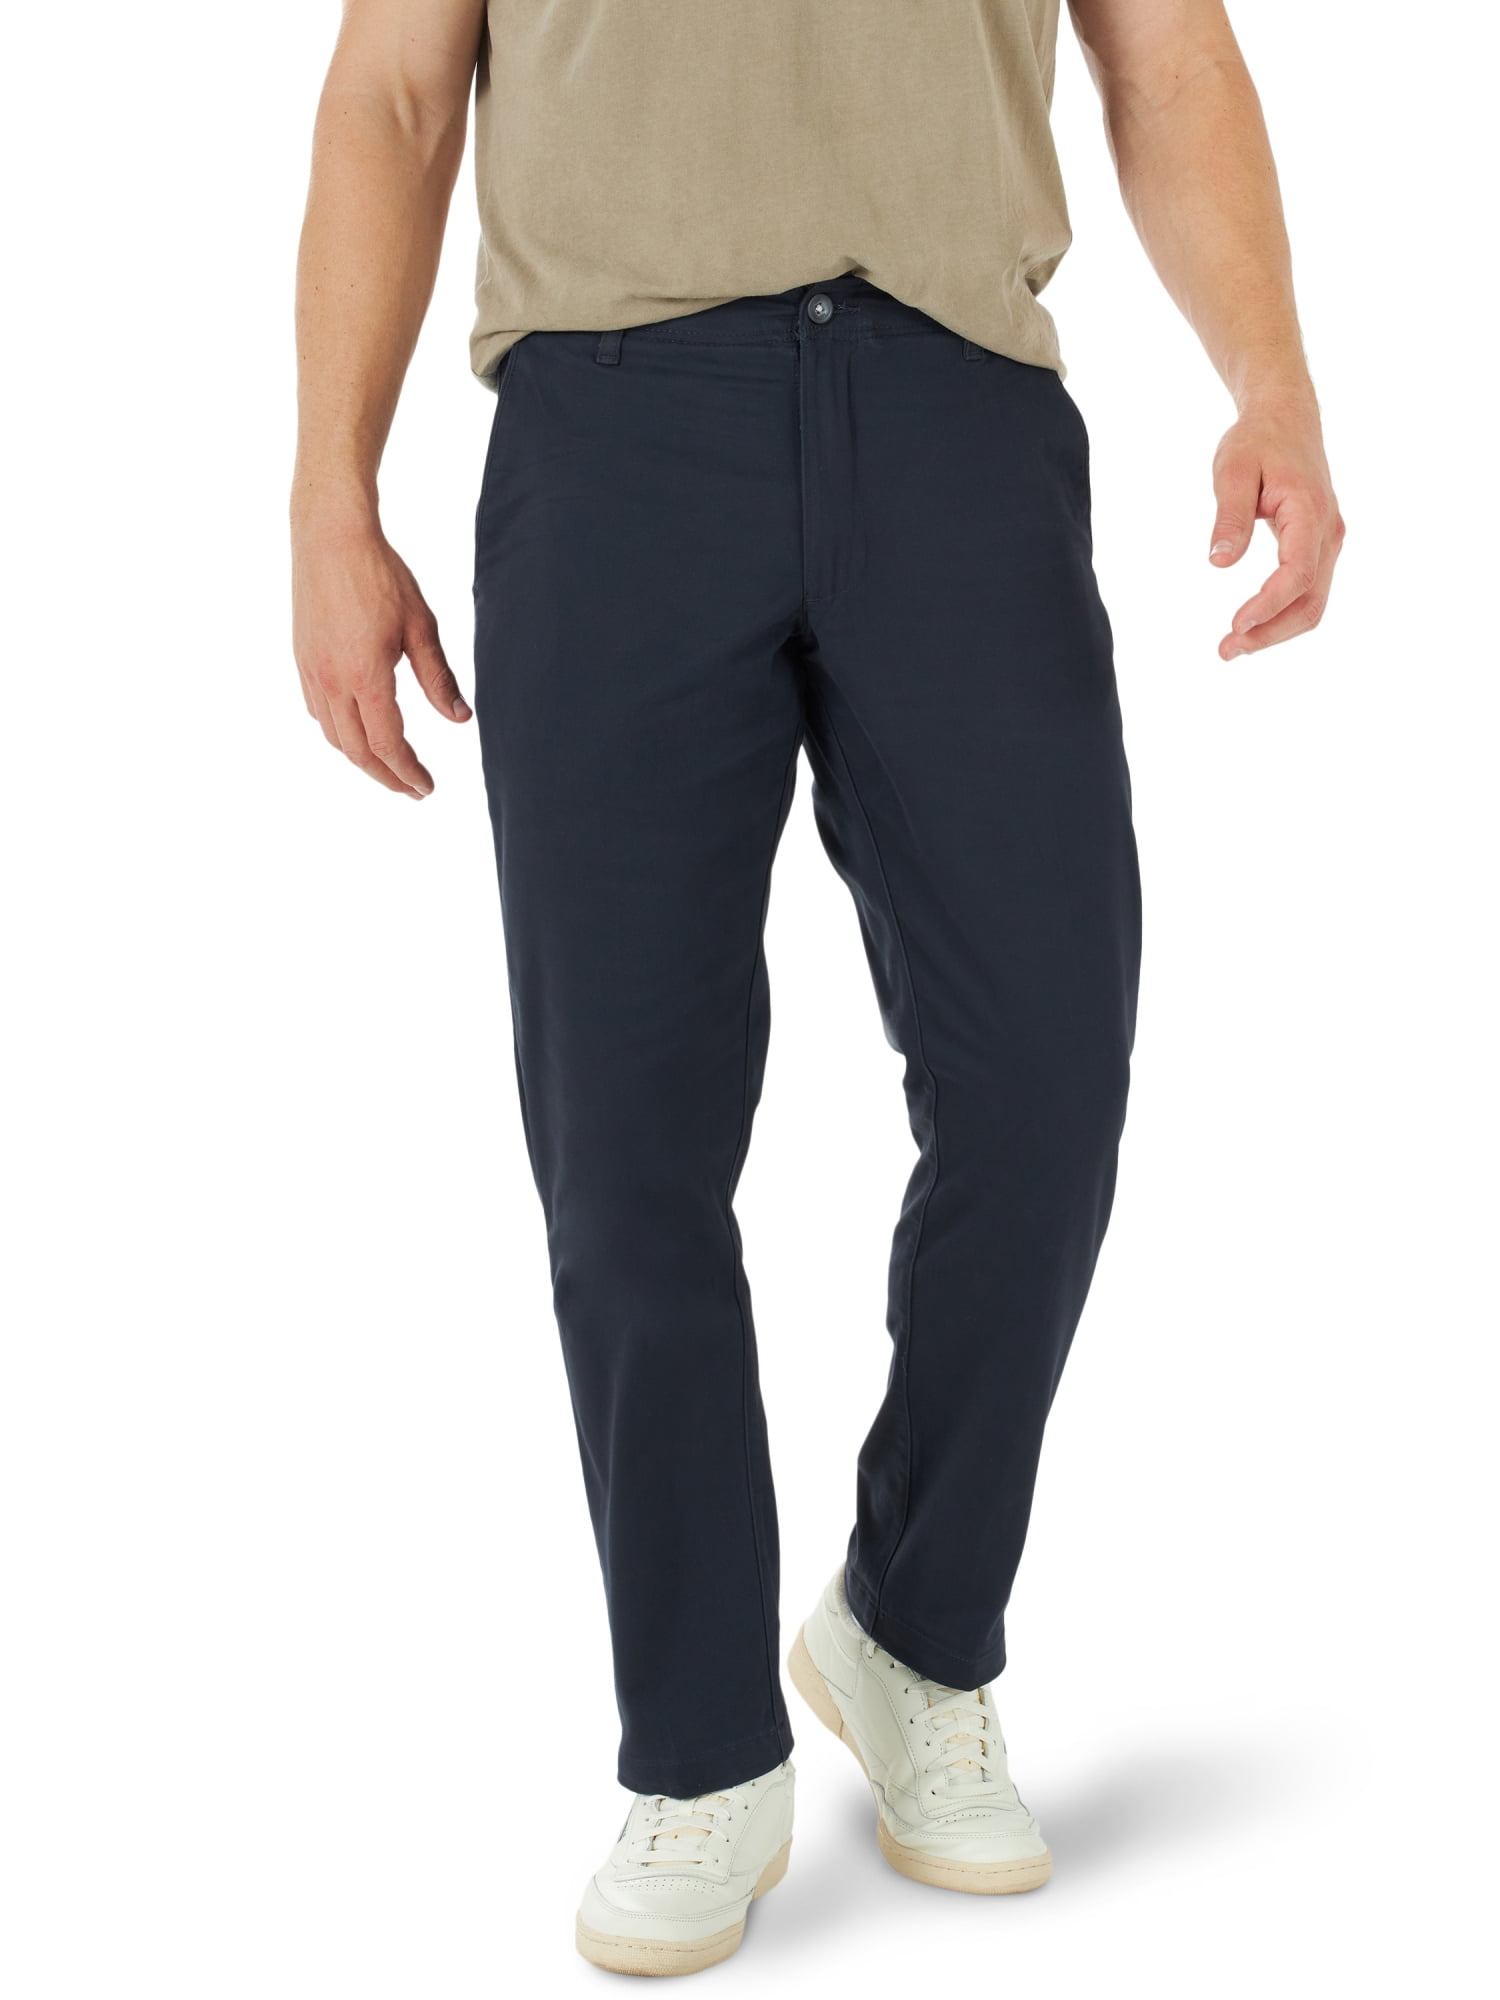 Lee Men's Extreme Comfort Relaxed Fit Pant 